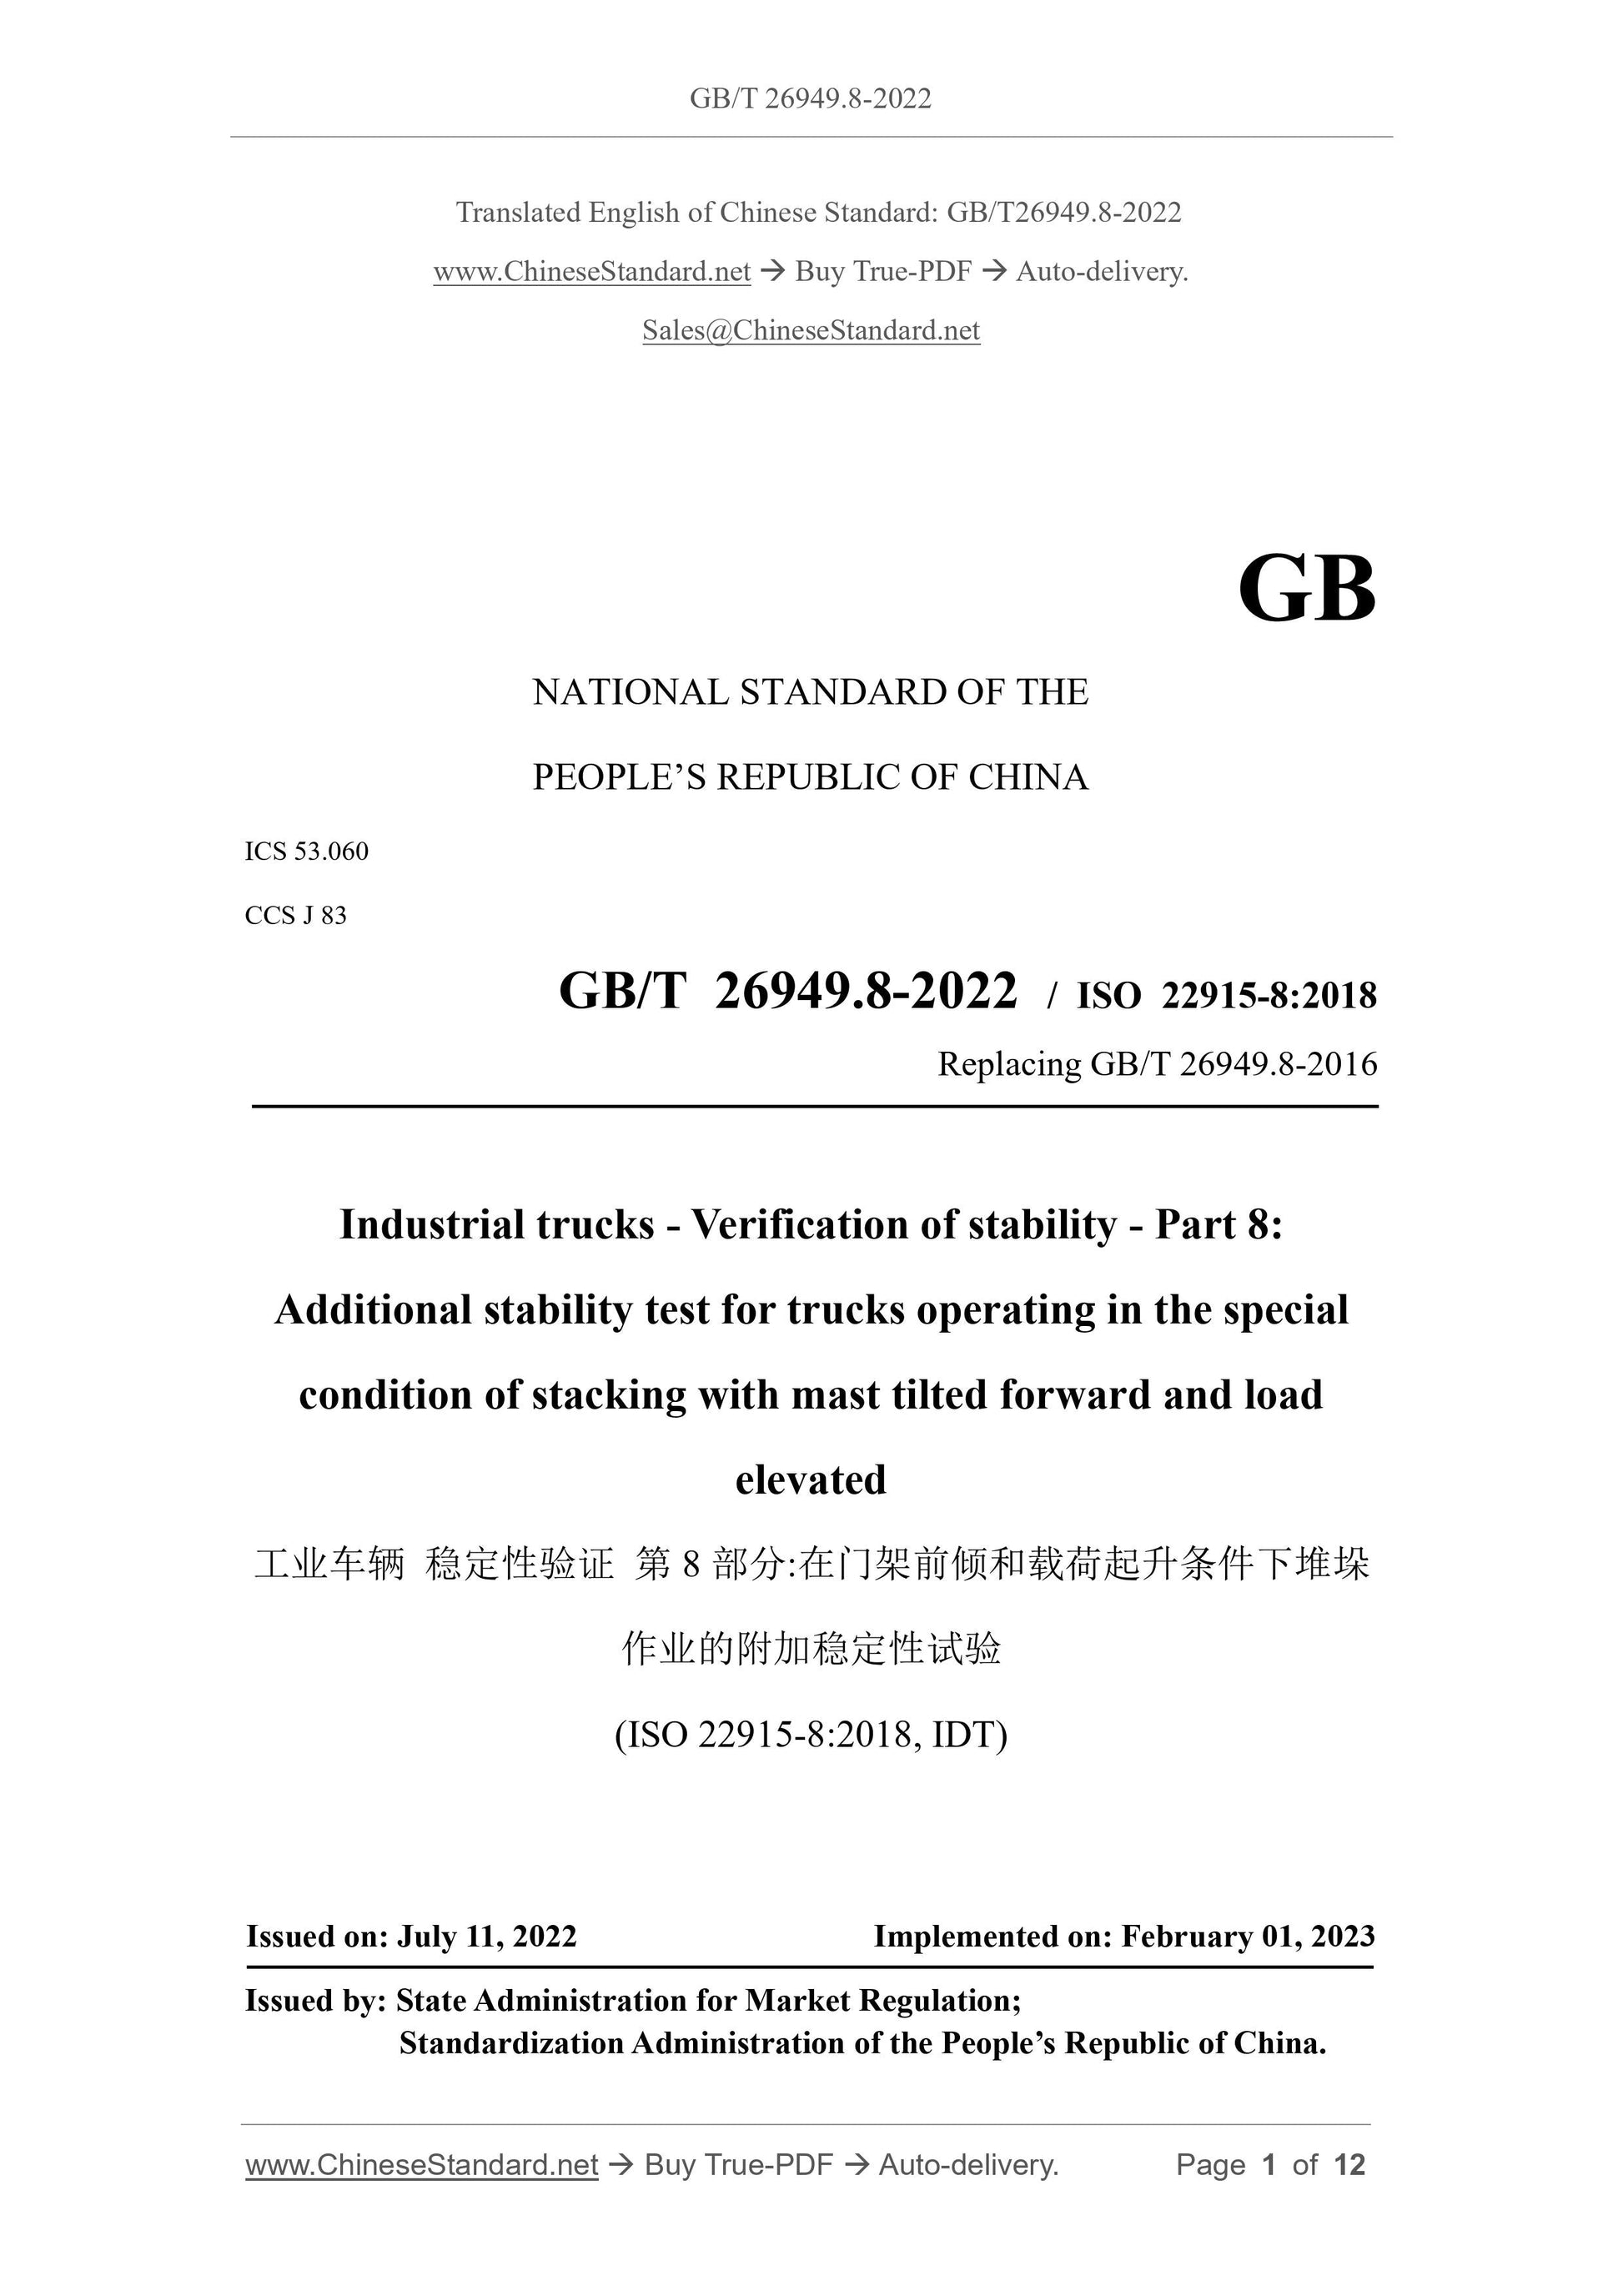 GB/T 26949.8-2022 Page 1